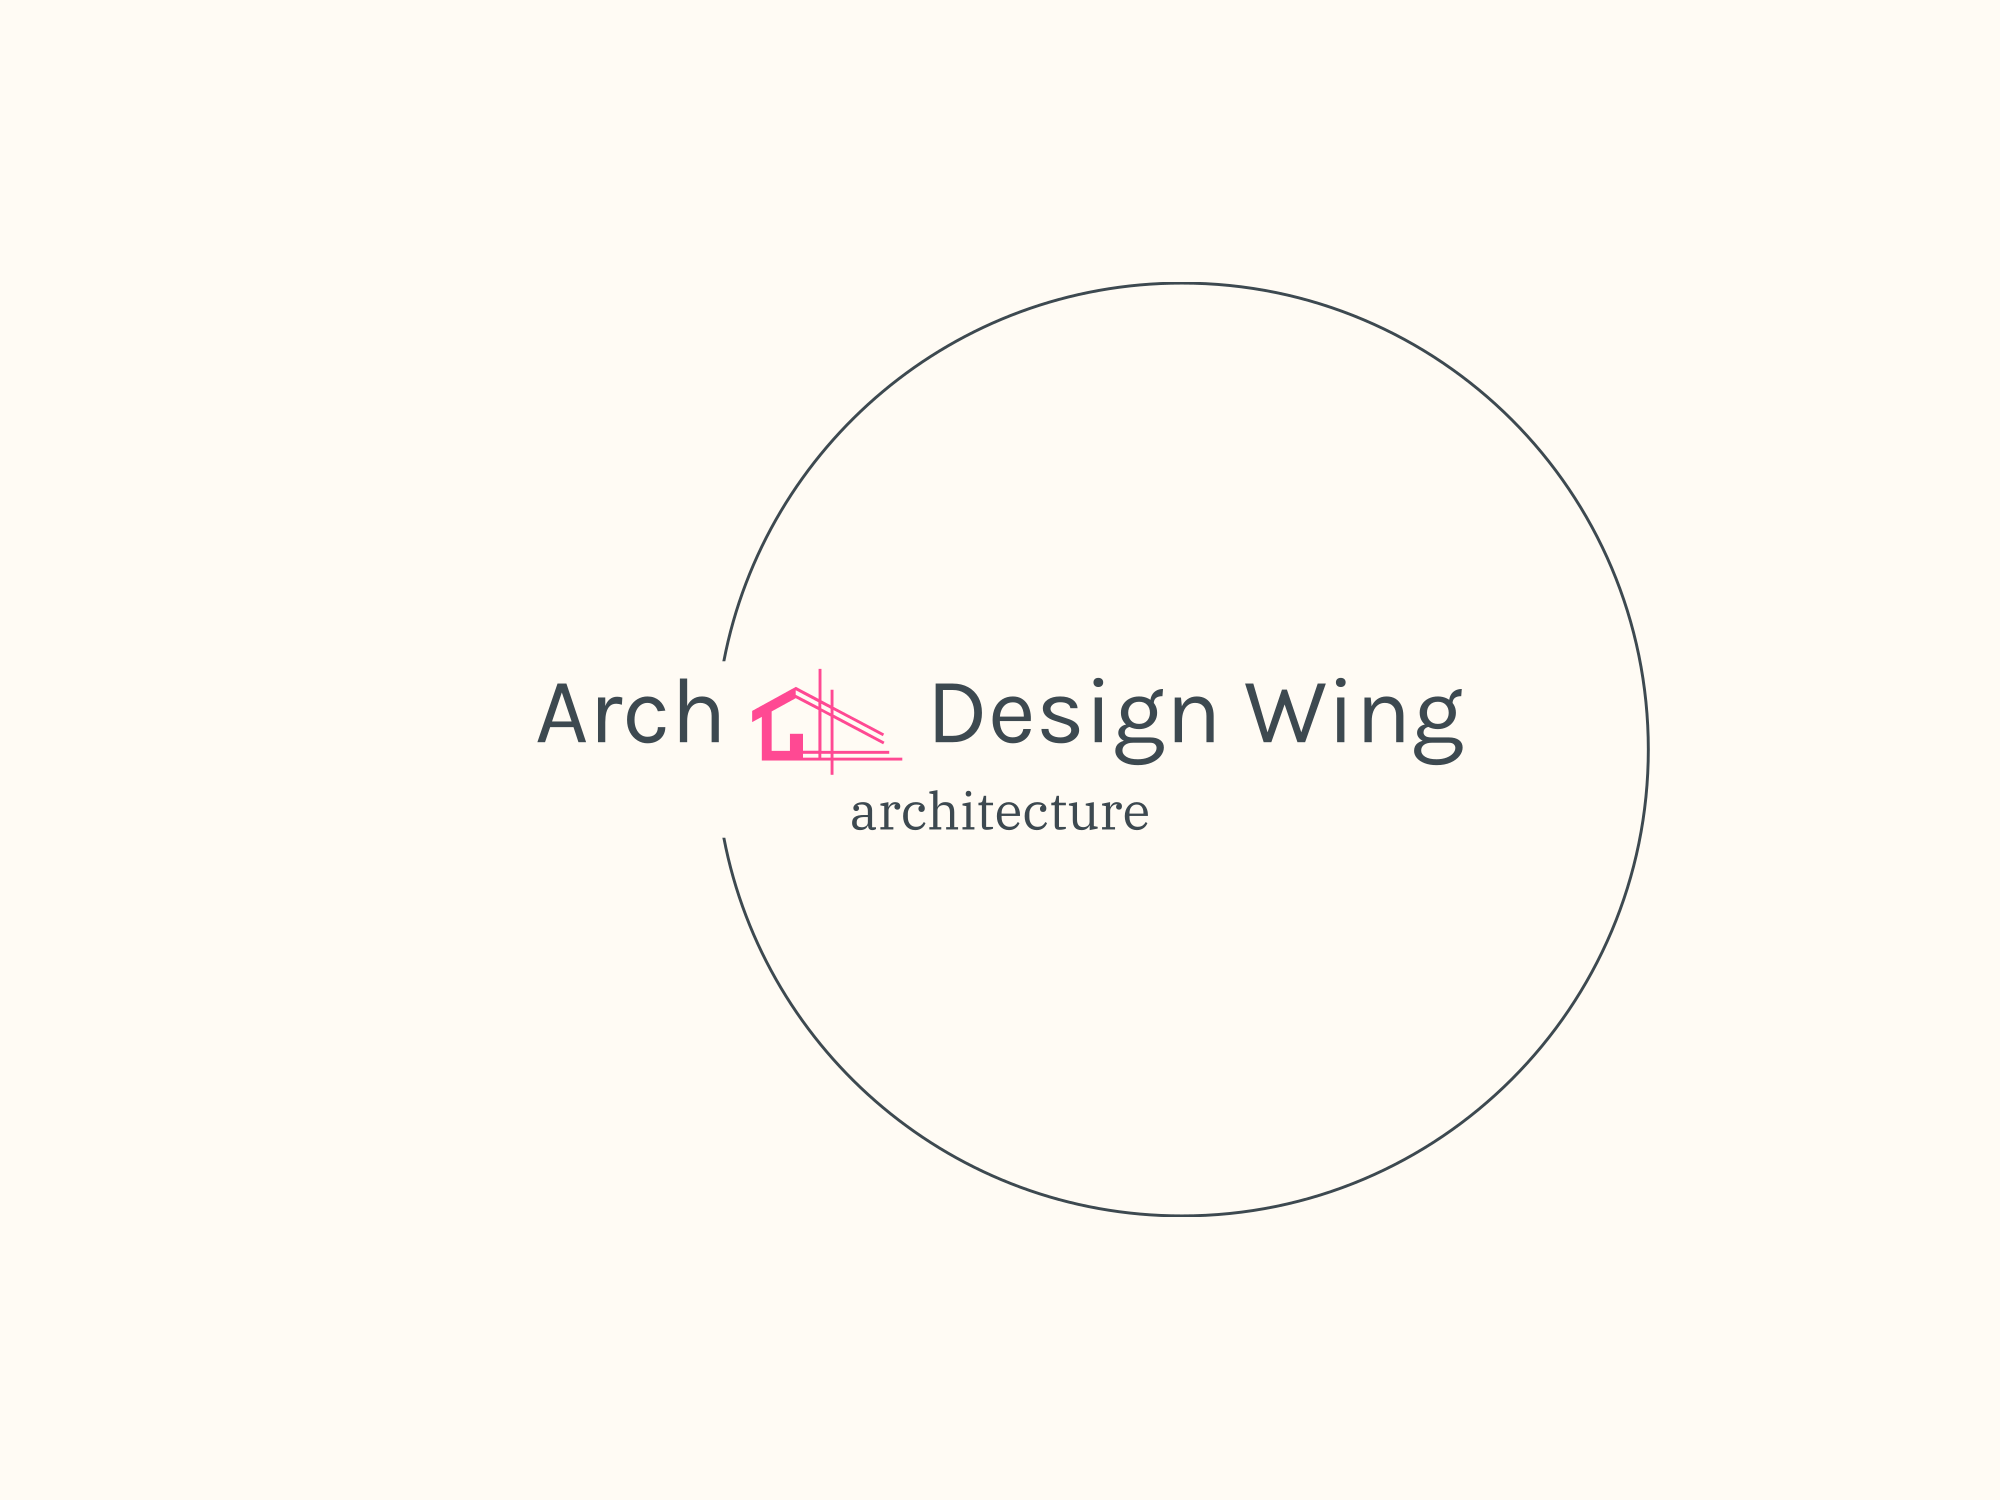 Arch Design Wing